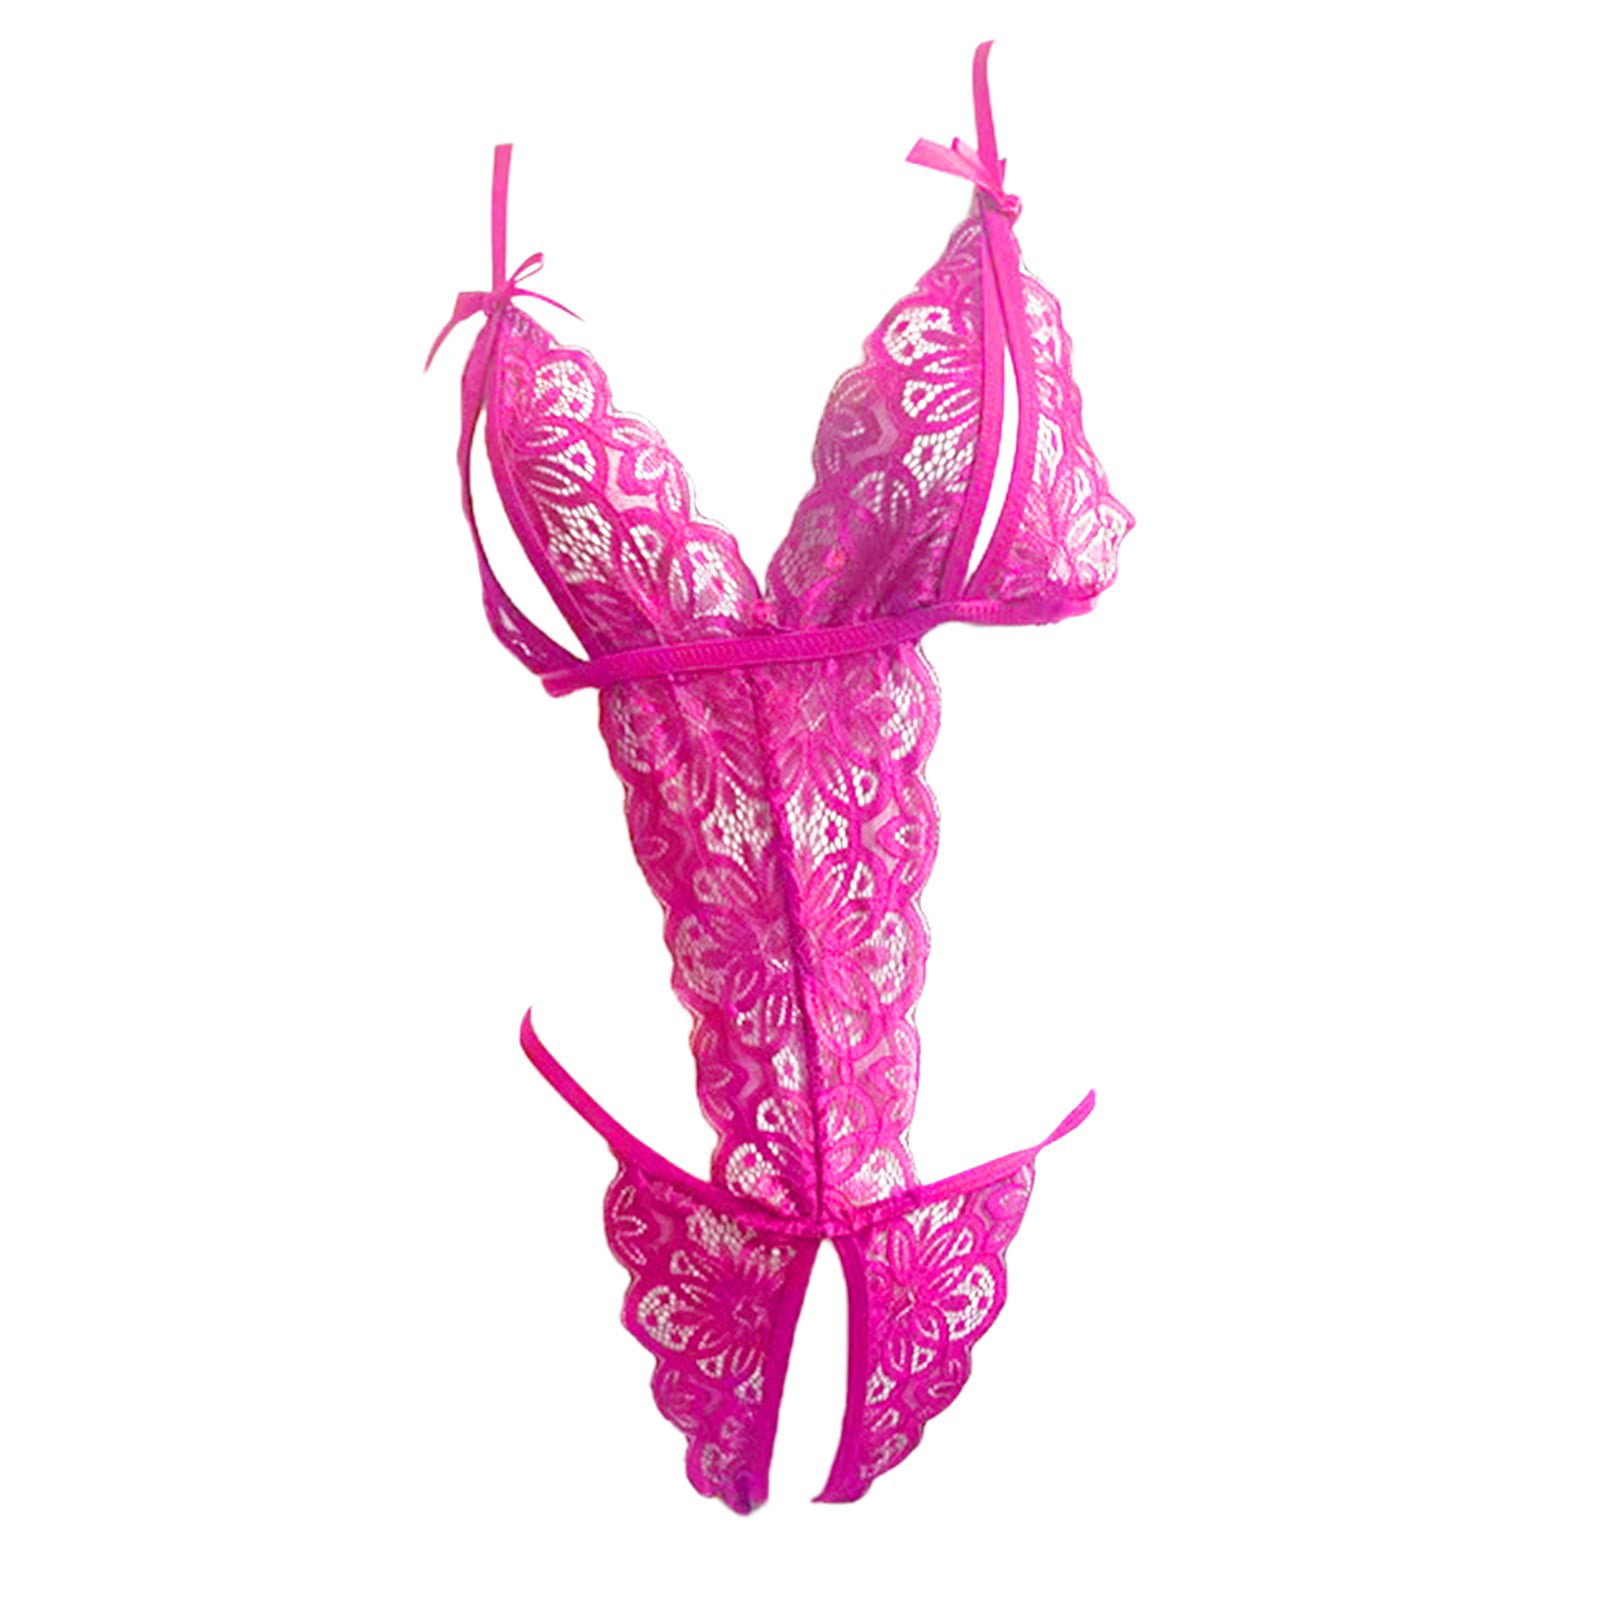 Aayomet Lingerie for Women Lenceria Extreme Dessous New Sexs